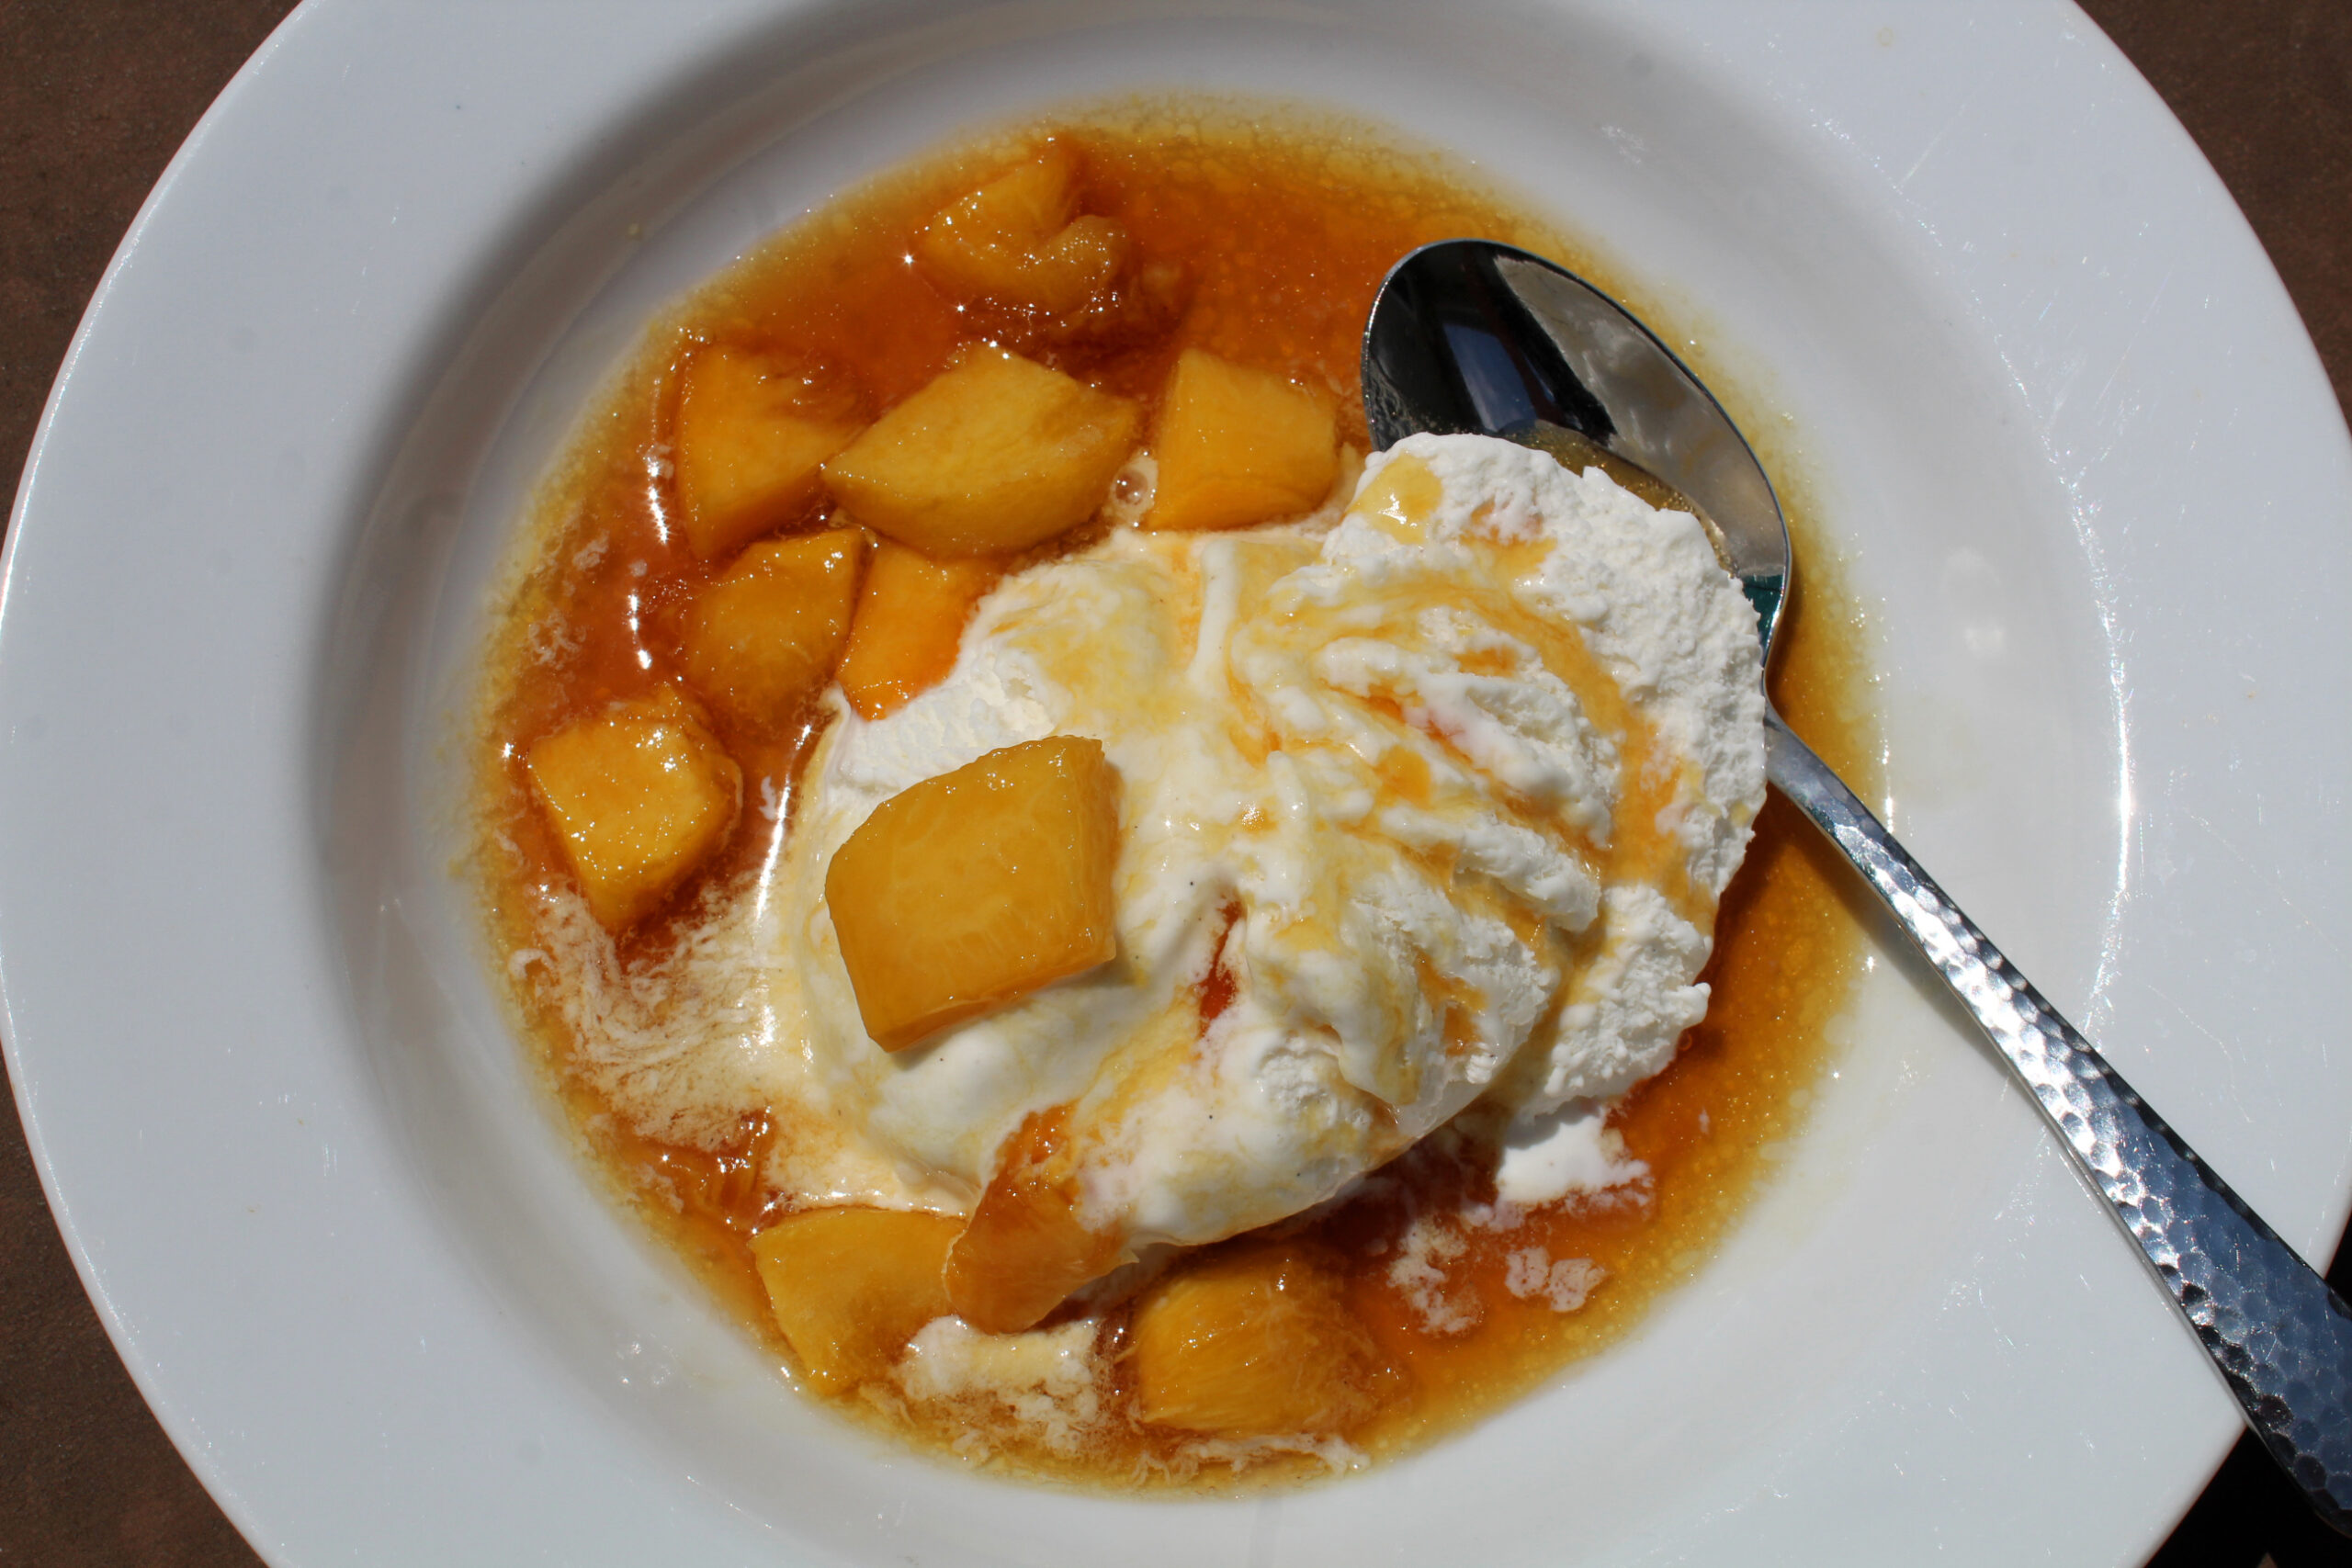 Fresh peach reduction sauce with vanilla bean ice cream is rich, decadent and easy